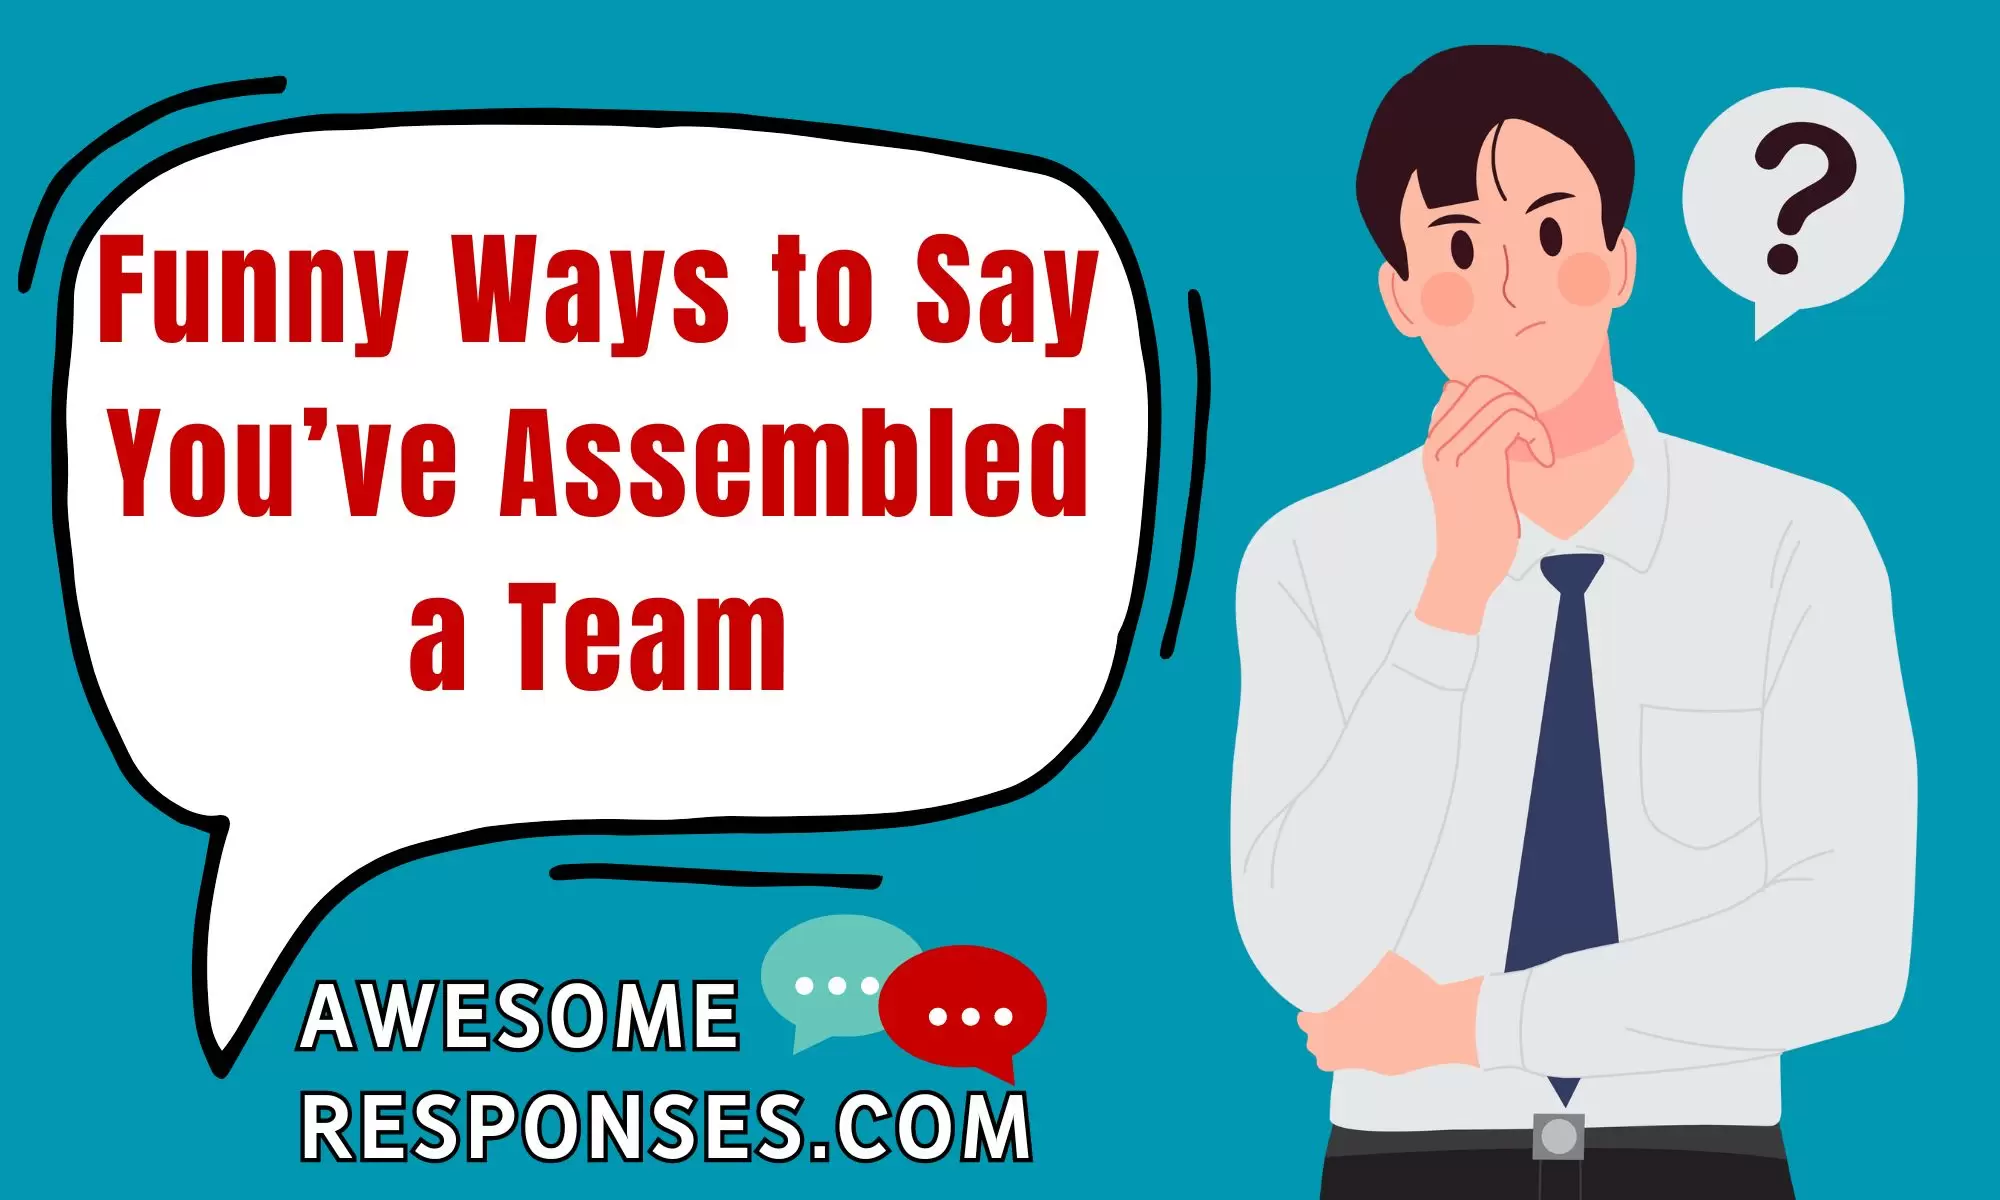 Funny Ways to Say You’ve Assembled a Team